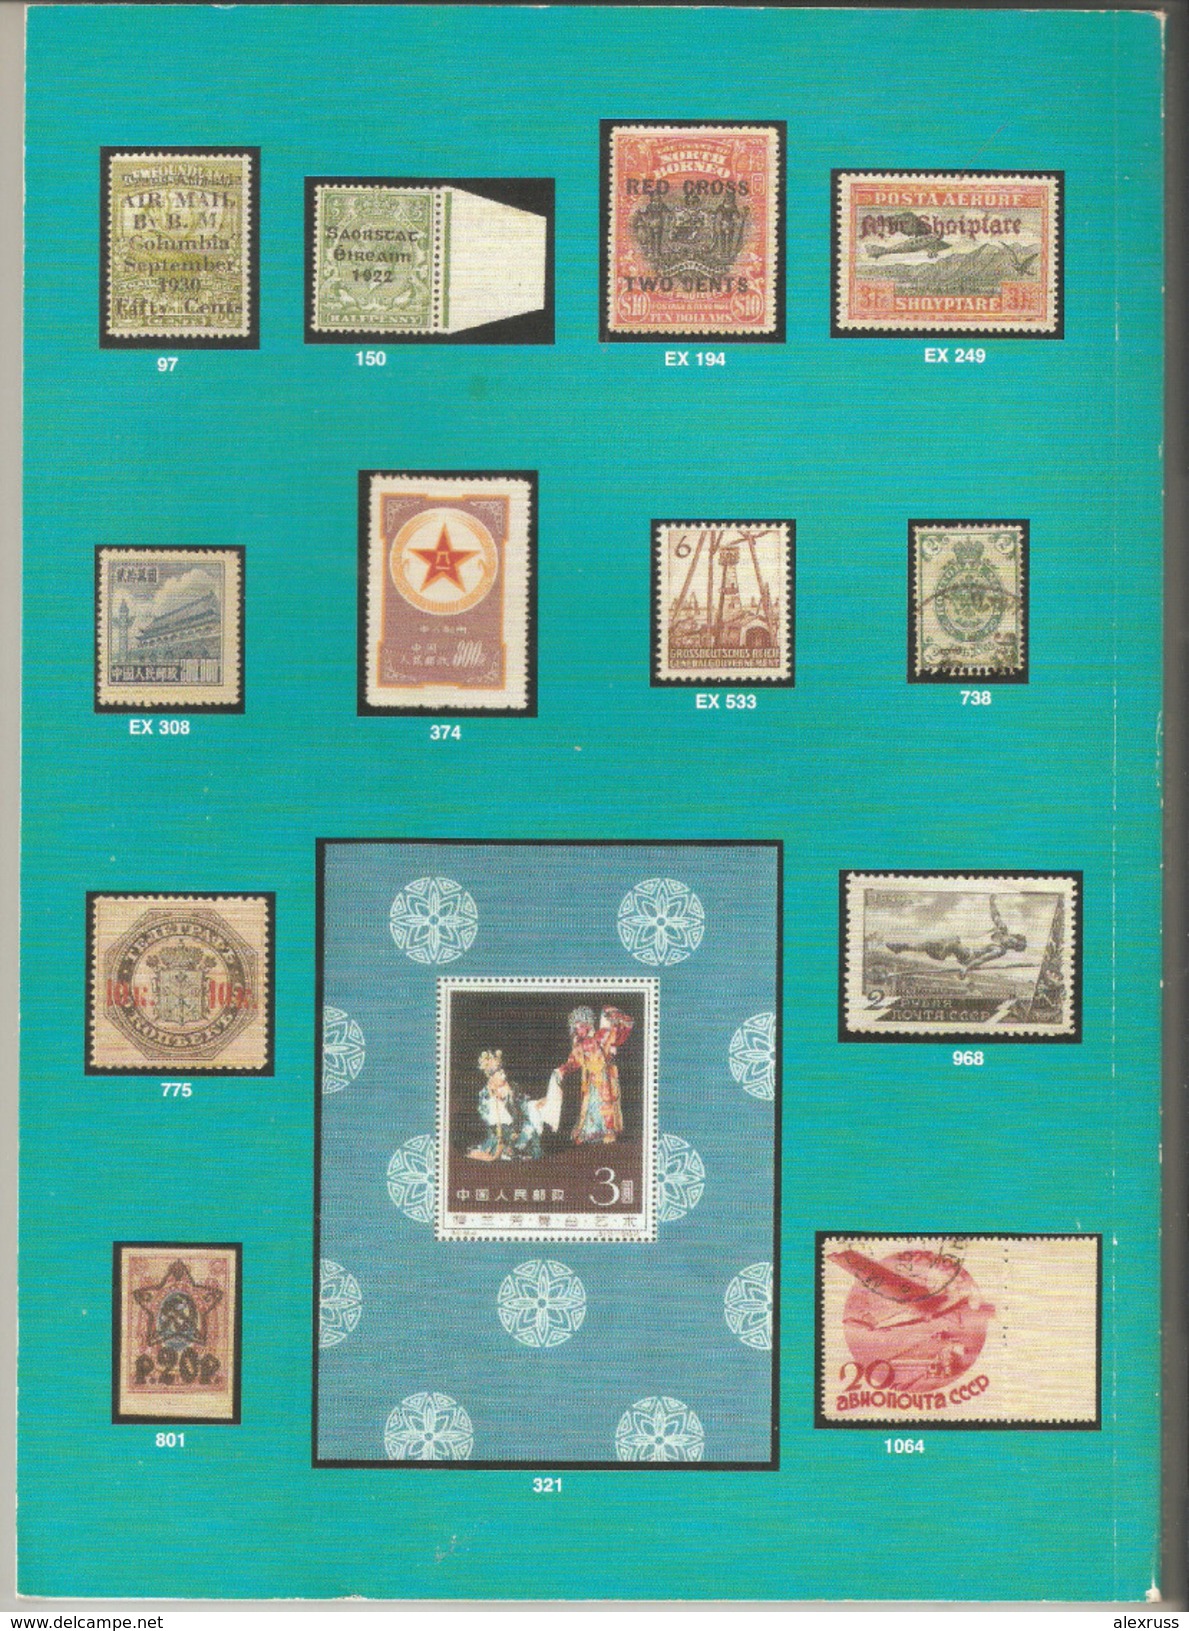 Raritan Stamps Auction 44,May 2010 Catalog Of Rare Russia Stamps,Errors & Worldwide Rarities - Catalogues For Auction Houses